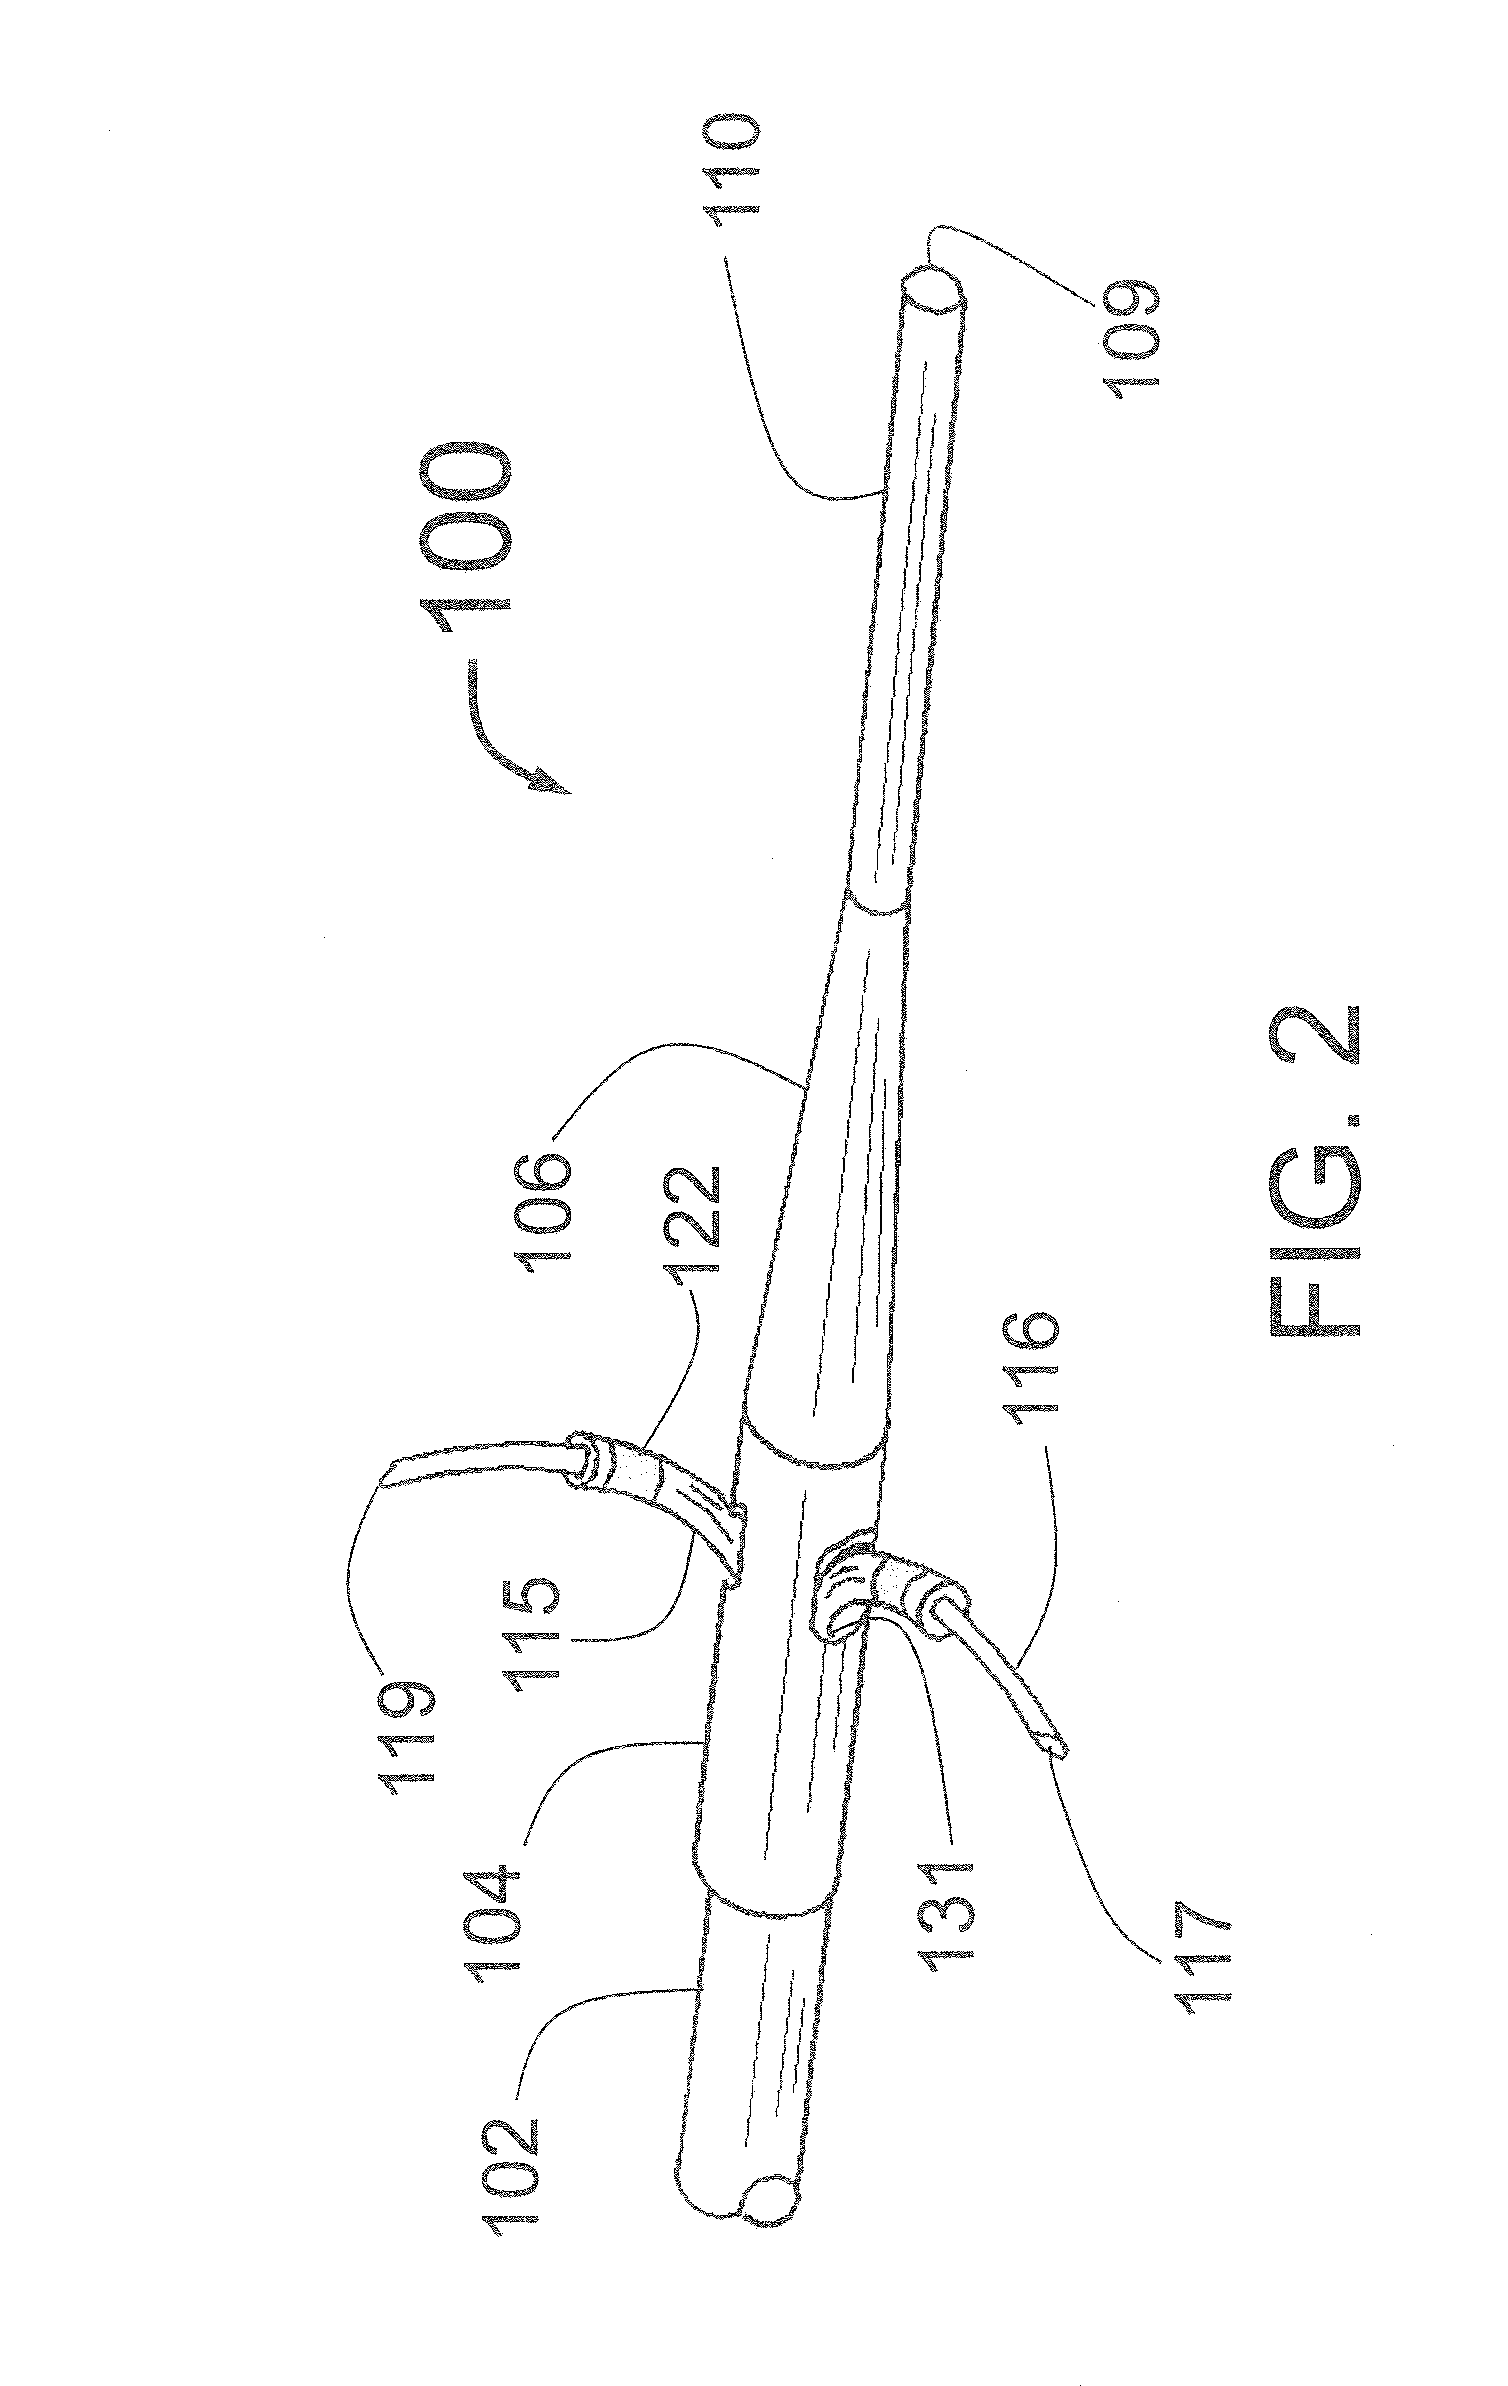 Peri-vascular tissue ablation catheter with support structures